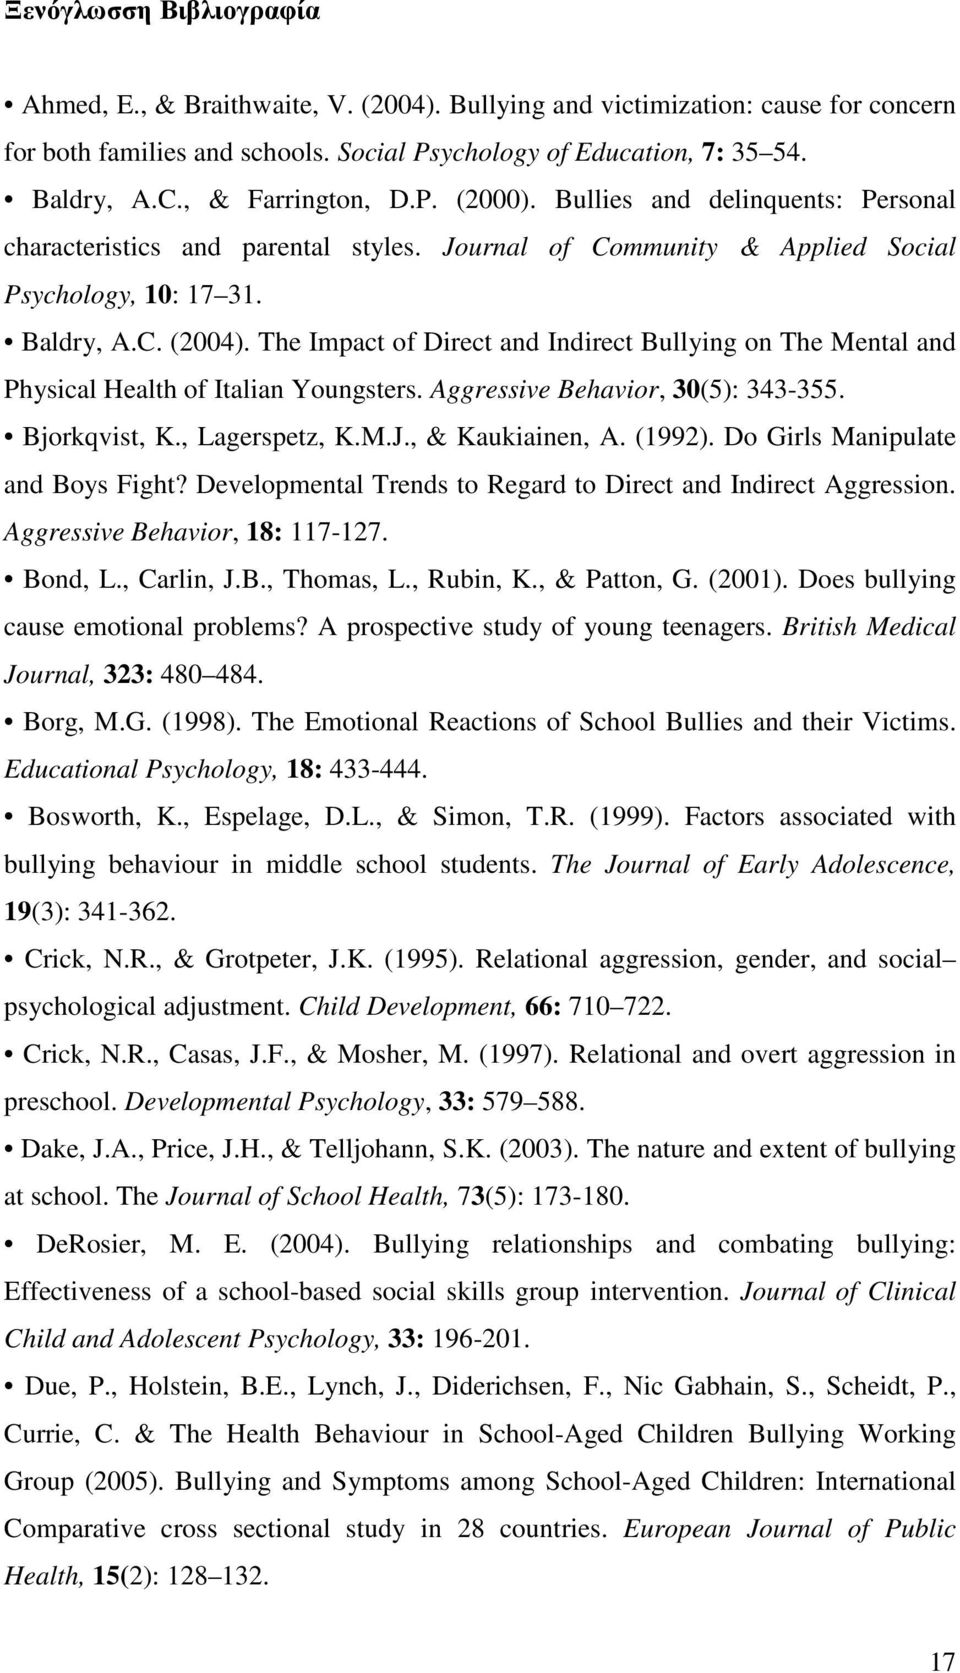 The Impact of Direct and Indirect Bullying on The Mental and Physical Health of Italian Youngsters. Aggressive Behavior, 30(5): 343-355. Bjorkqvist, K., Lagerspetz, K.M.J., & Kaukiainen, A. (1992).